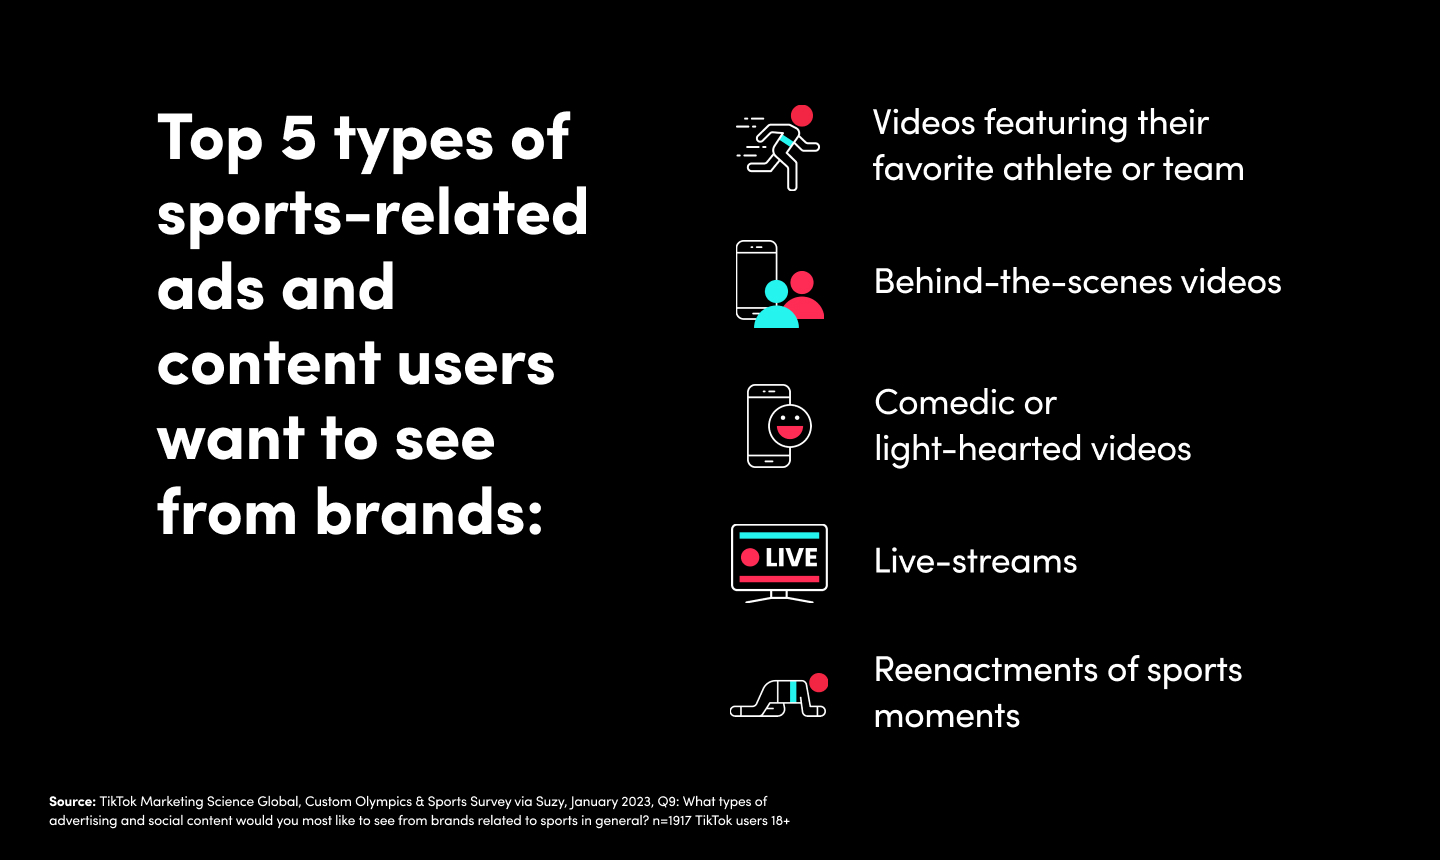 Top 5 types of sports-related ads and content TikTok users want to see from brands